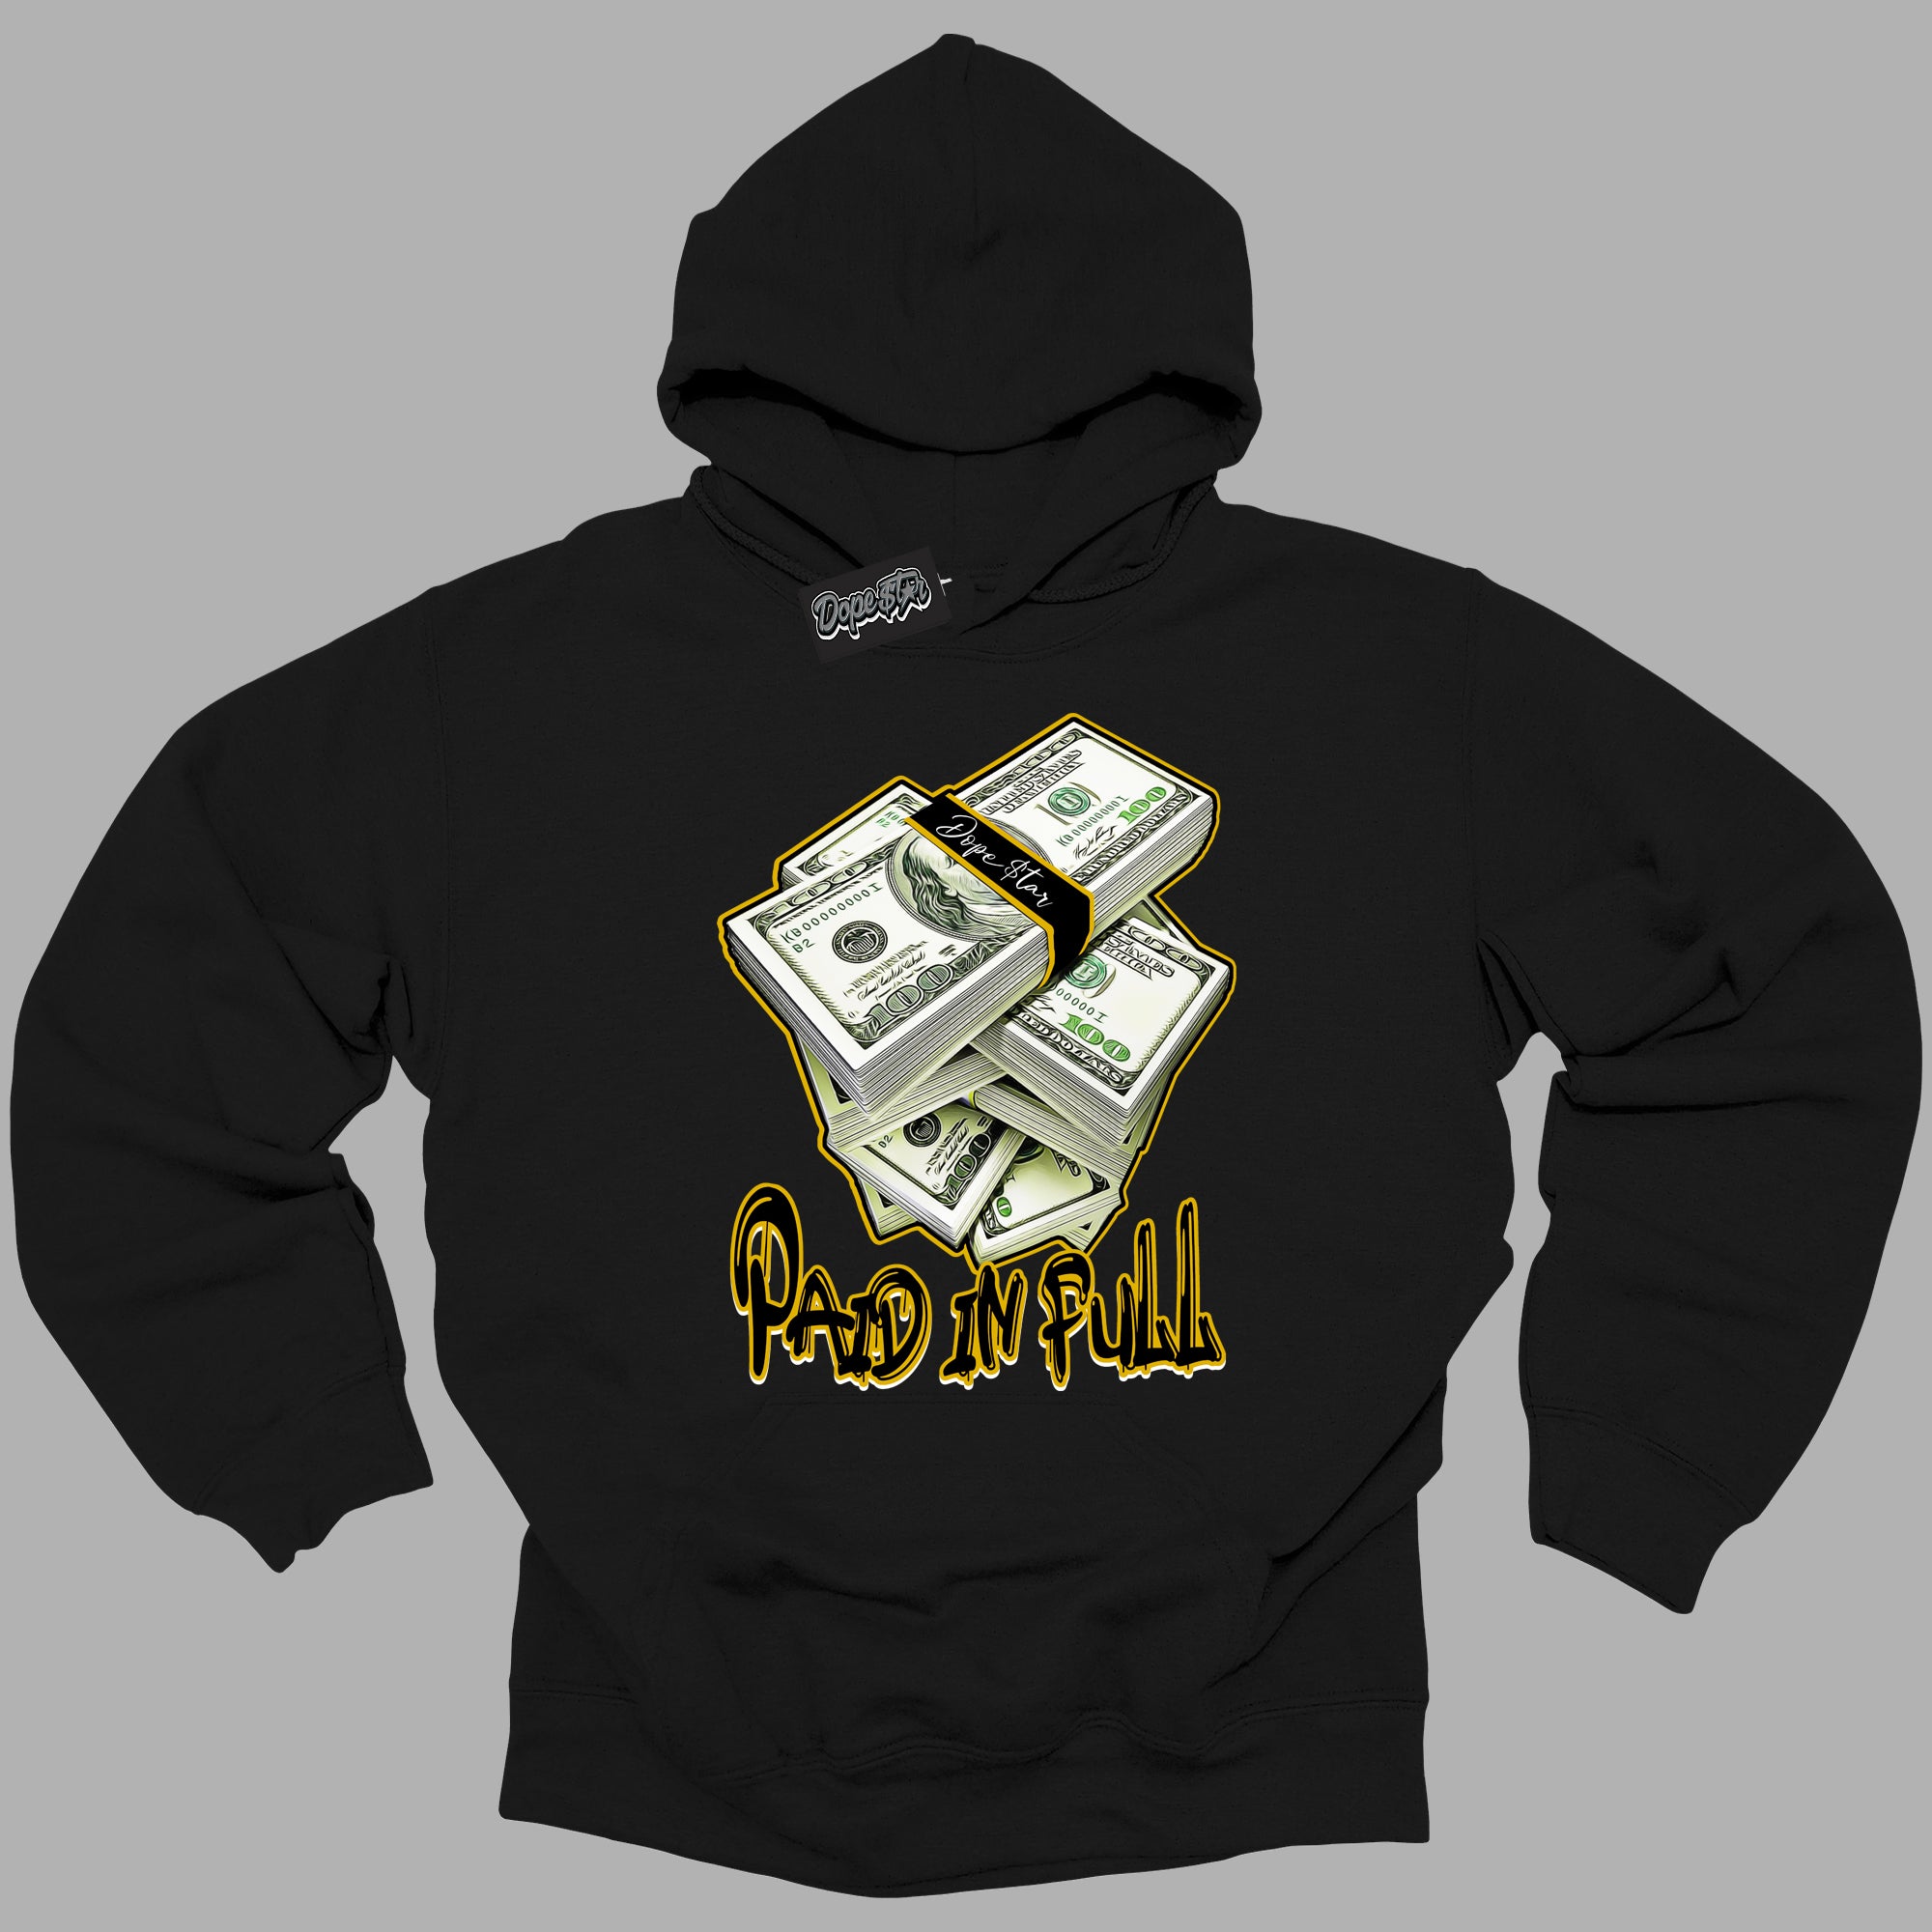 Cool Black Hoodie with “ Paid In Full ”  design that Perfectly Matches Yellow Ochre 6s Sneakers.